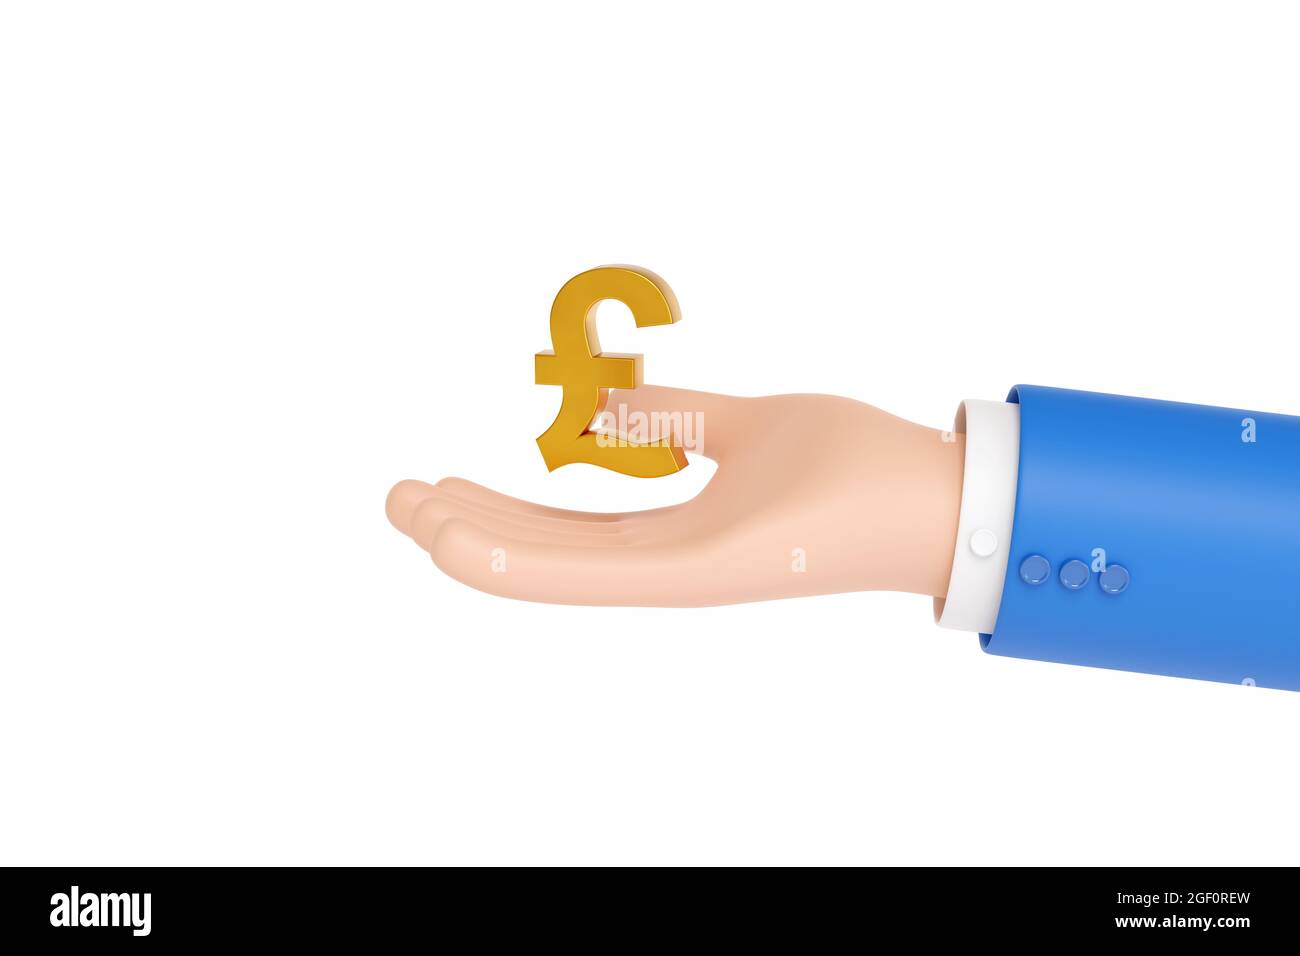 Cartoon hand holding a pound symbol isolated in white background. 3d illustration. Stock Photo